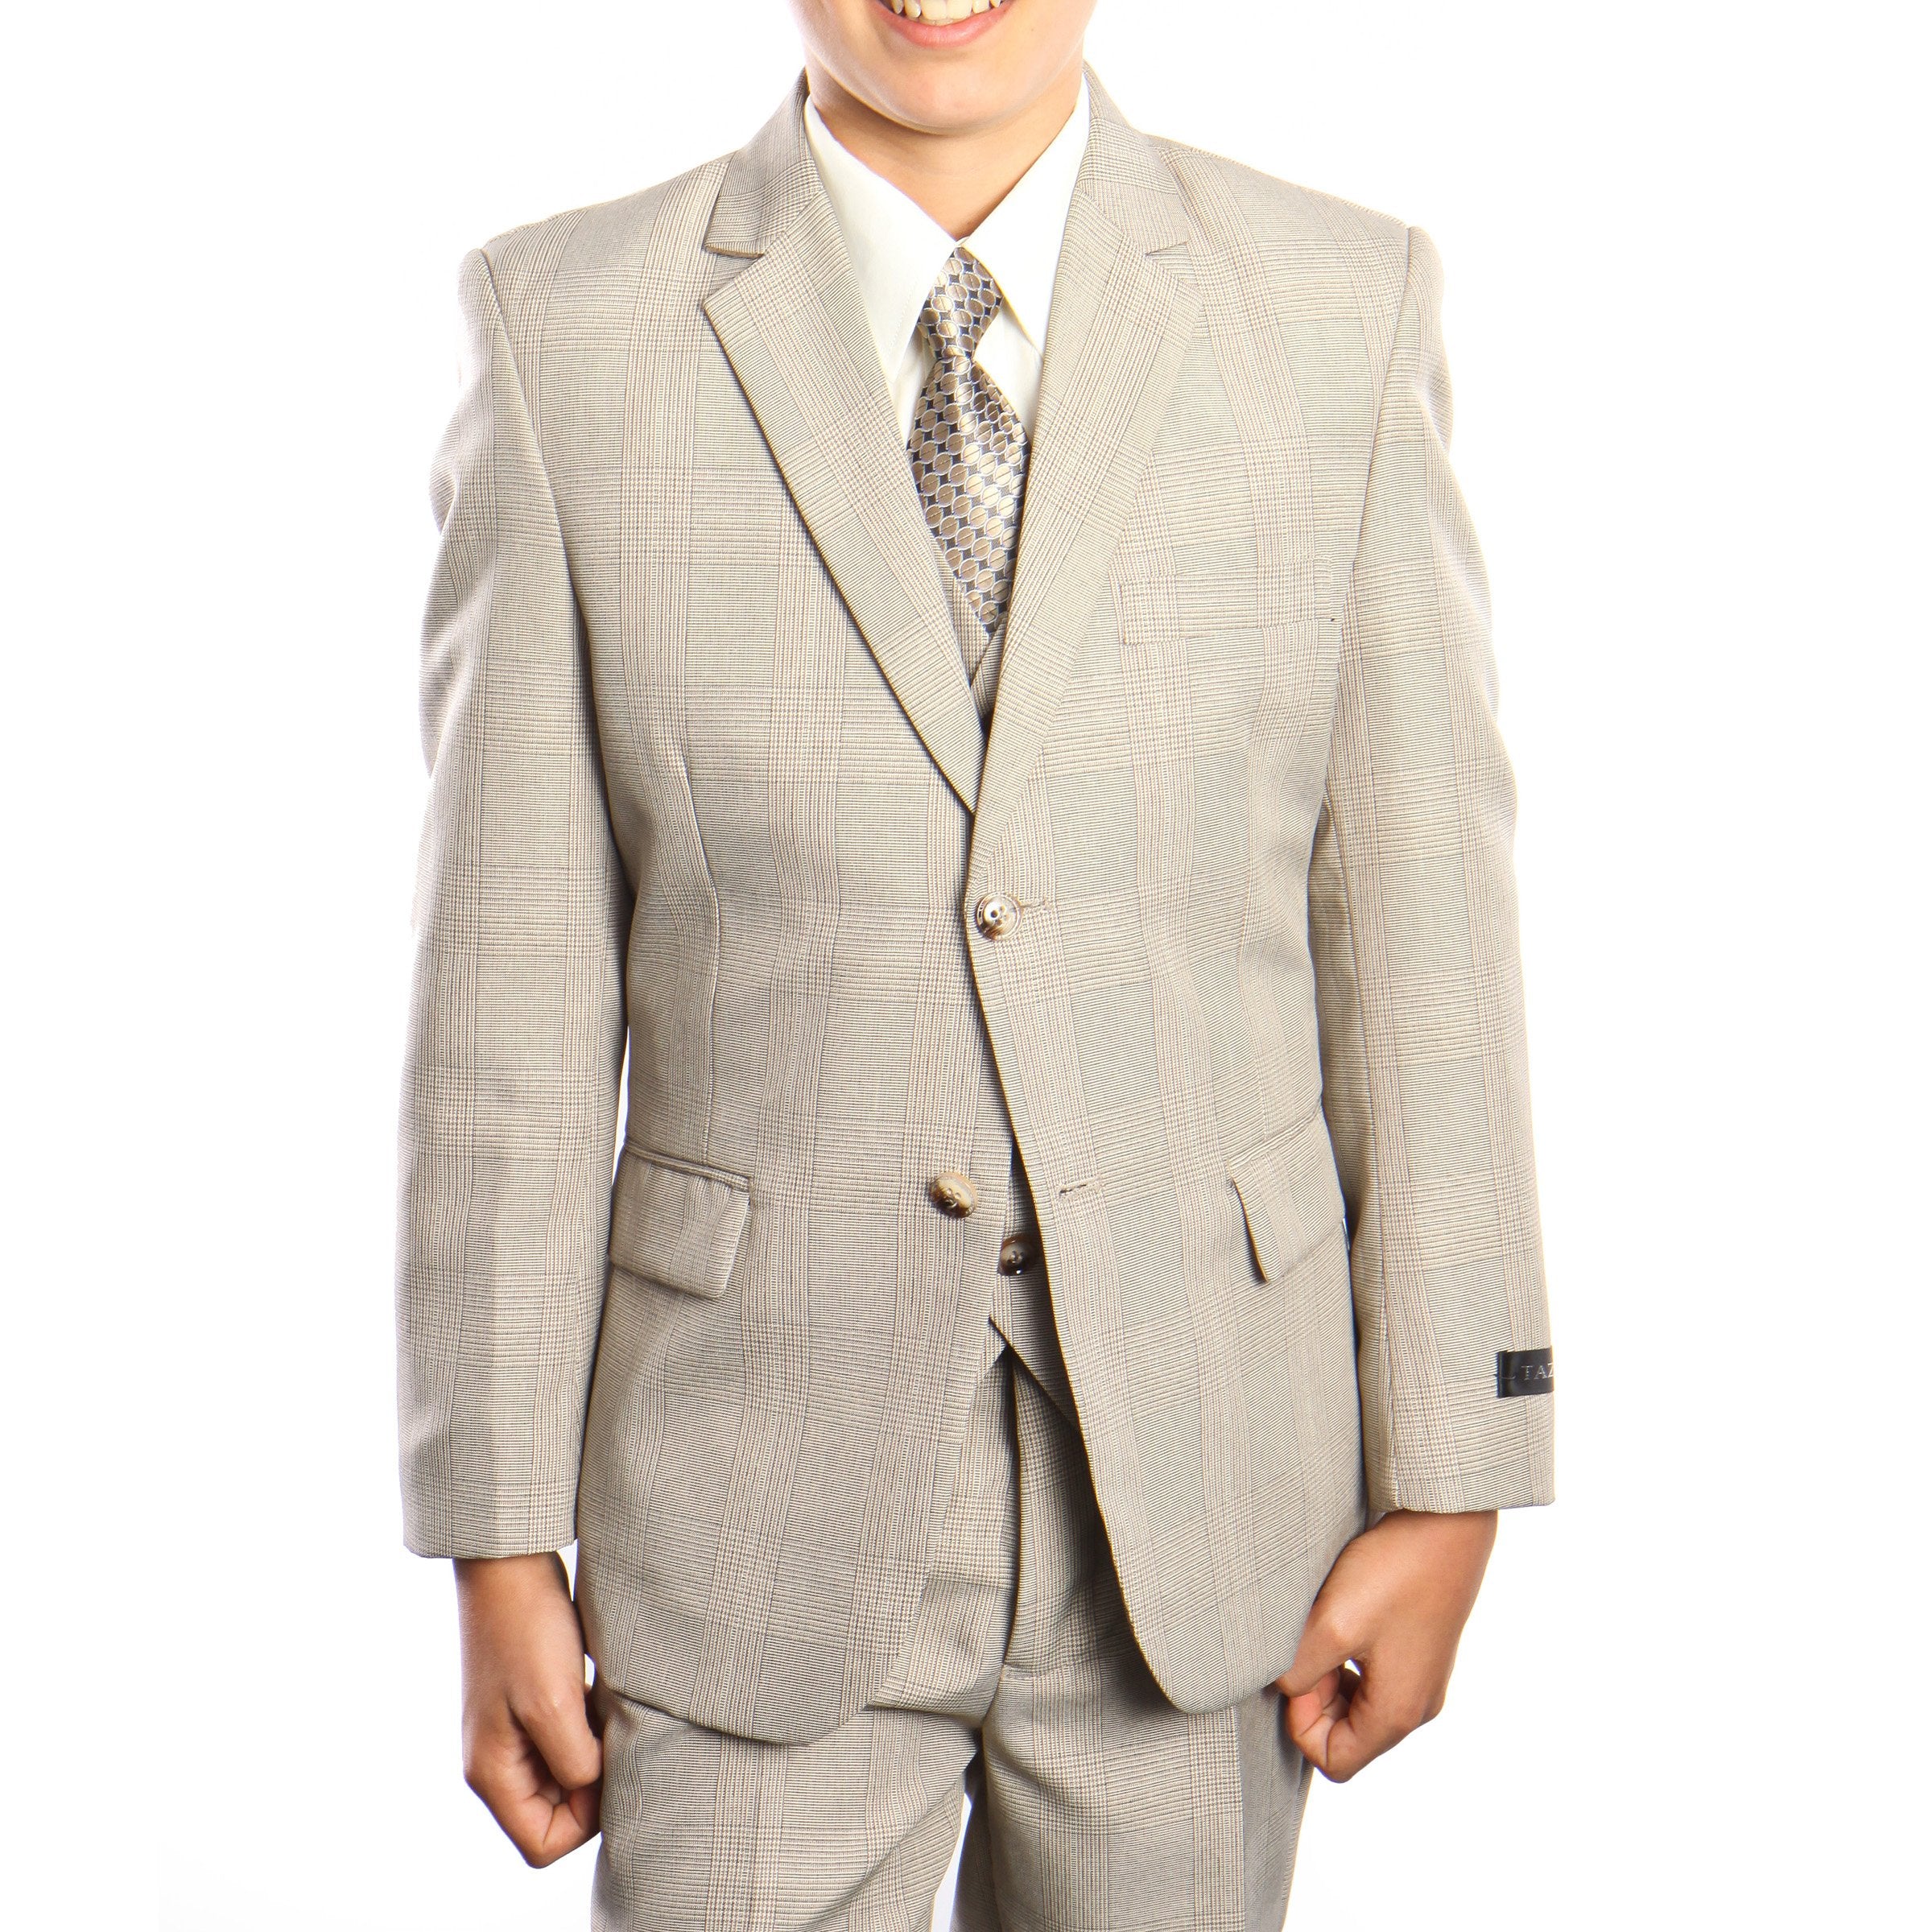 3-Piece Set With Shirt & Tie Suits For Boy's